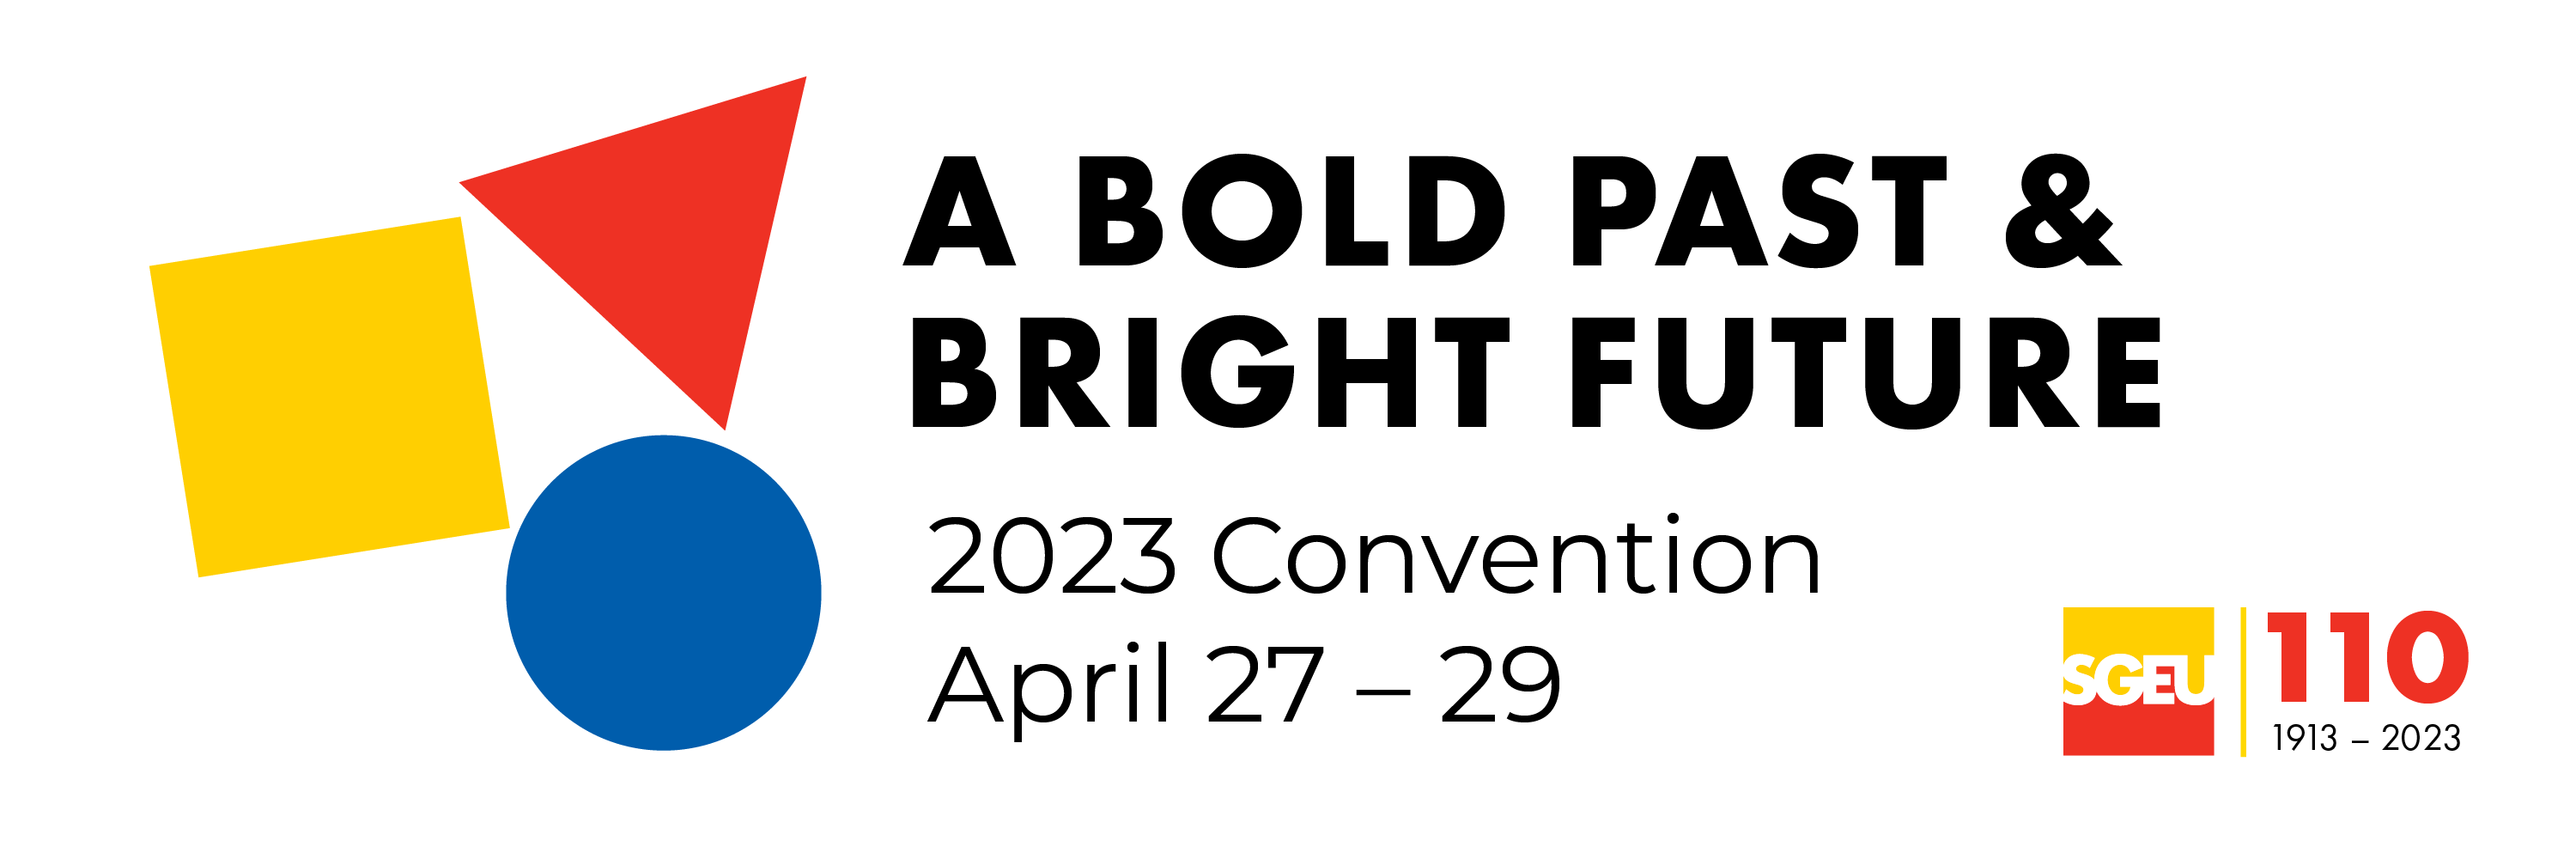 Promotional graphic for 2023 Convention